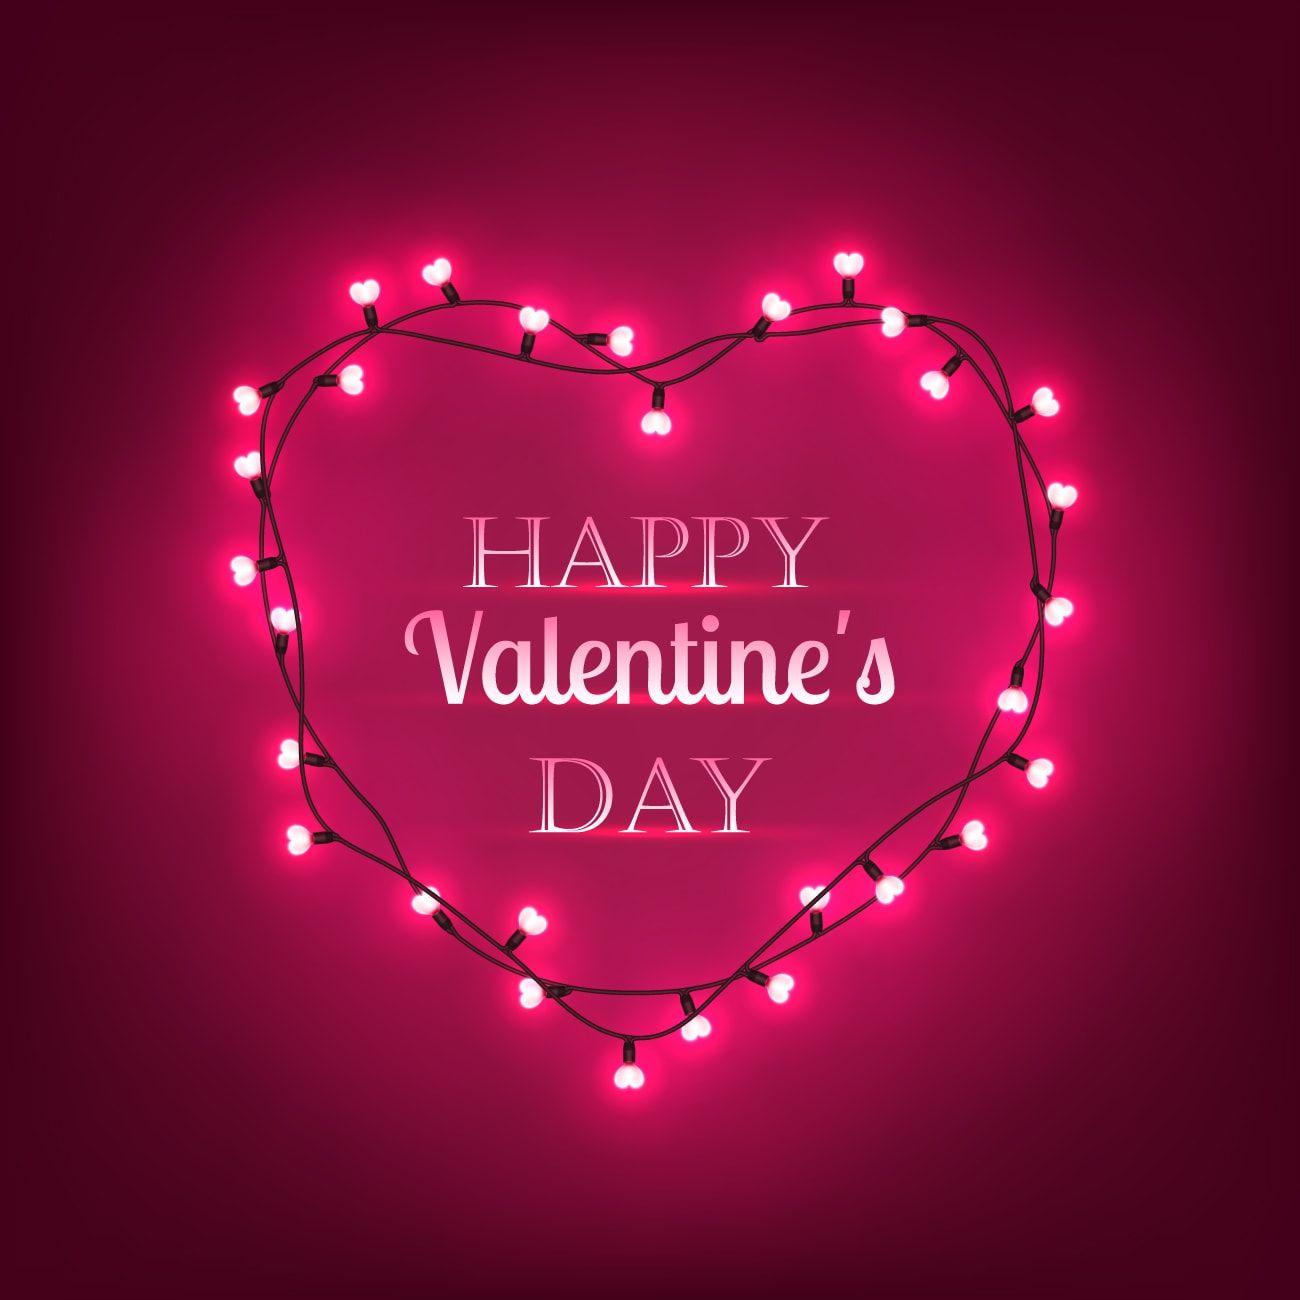 I Love You Happy Valentines Day 2018 The Best Collection of Quotes